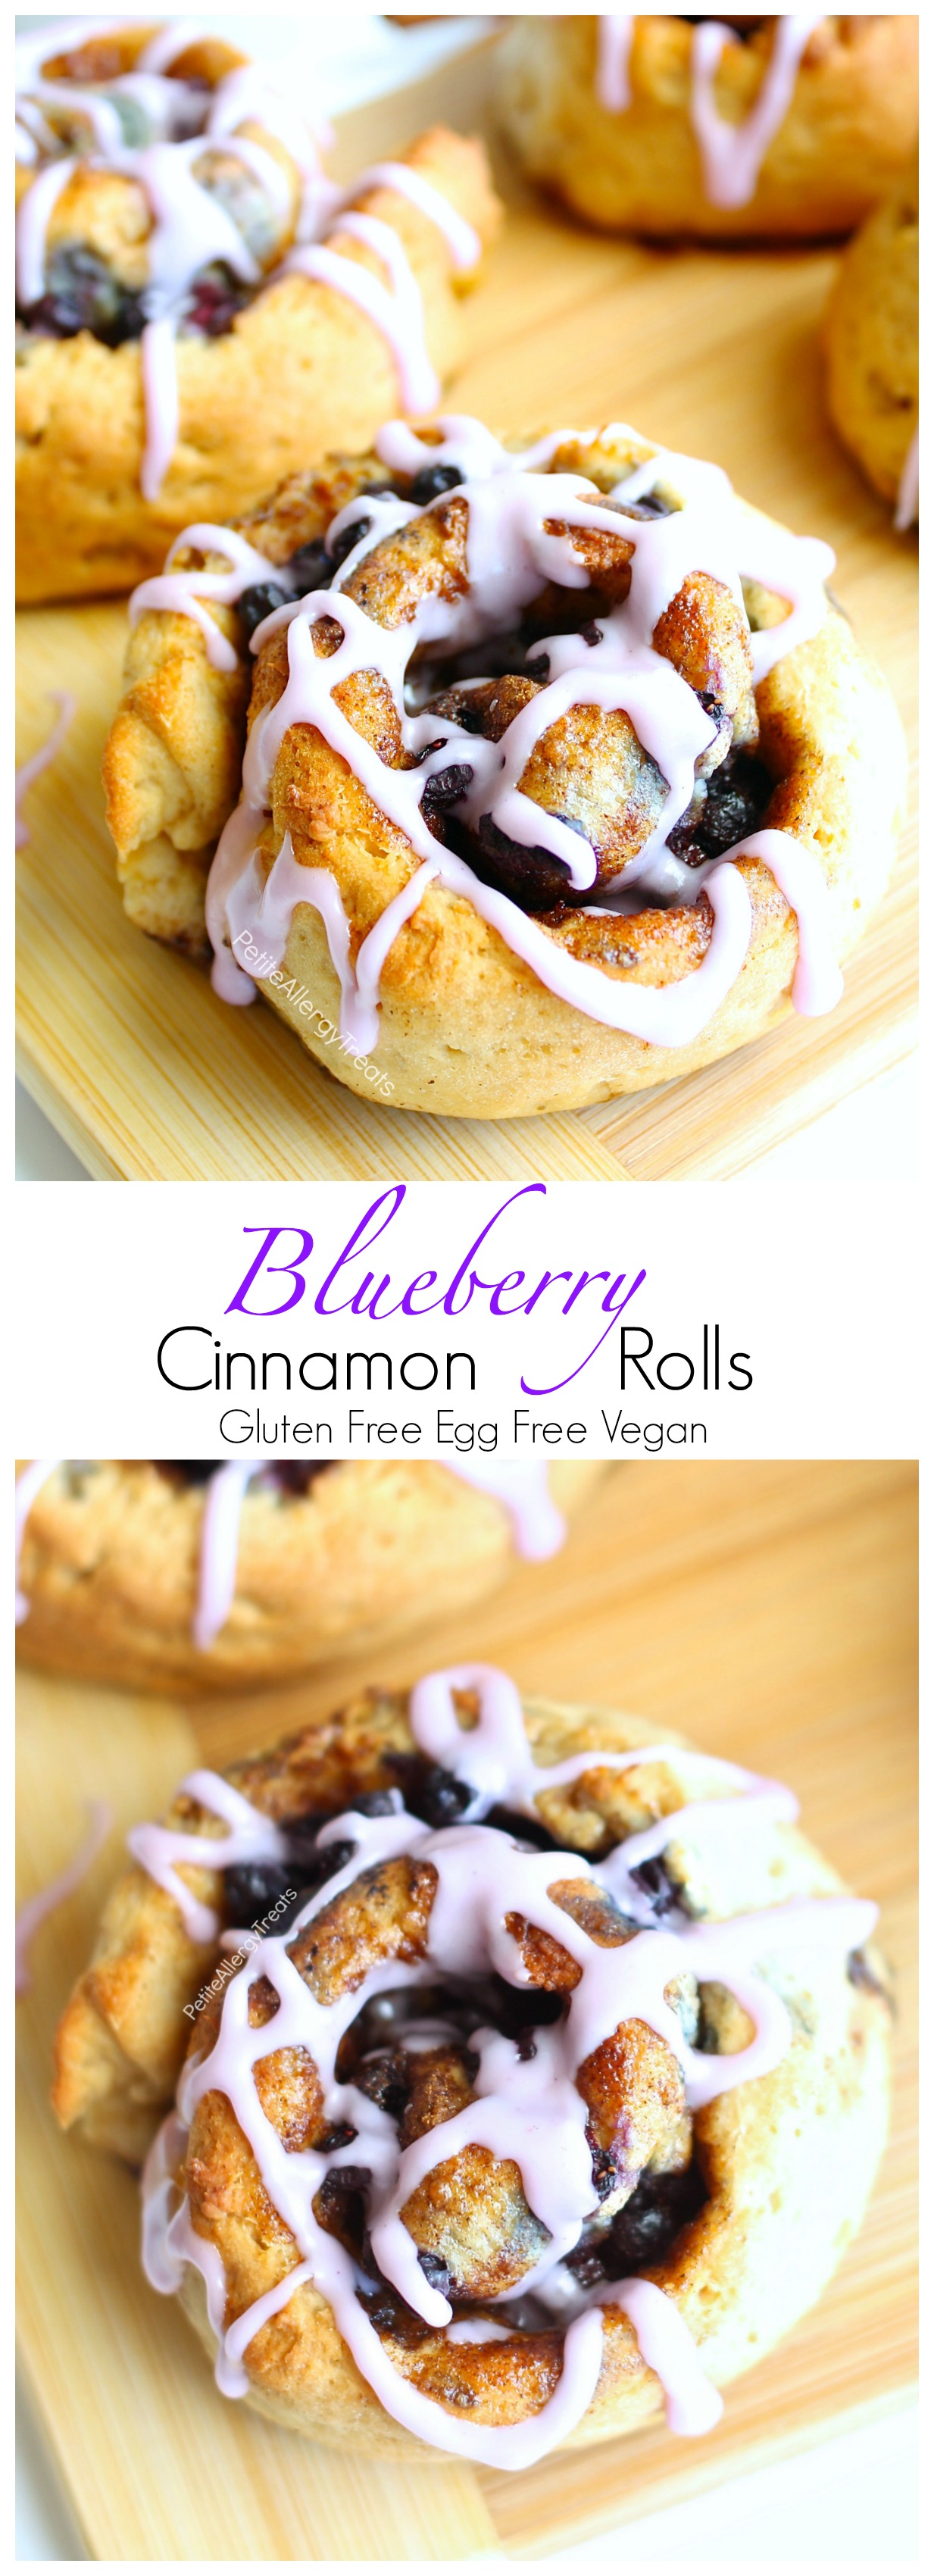 Gluten Free Blueberry Cinnamon Rolls Recipe (Gluten Free Vegan dairy free egg free)- Soft and sweet gluten free cinnamon buns with real blueberries. Hard to believe they are dairy free and food allergy friendly too!